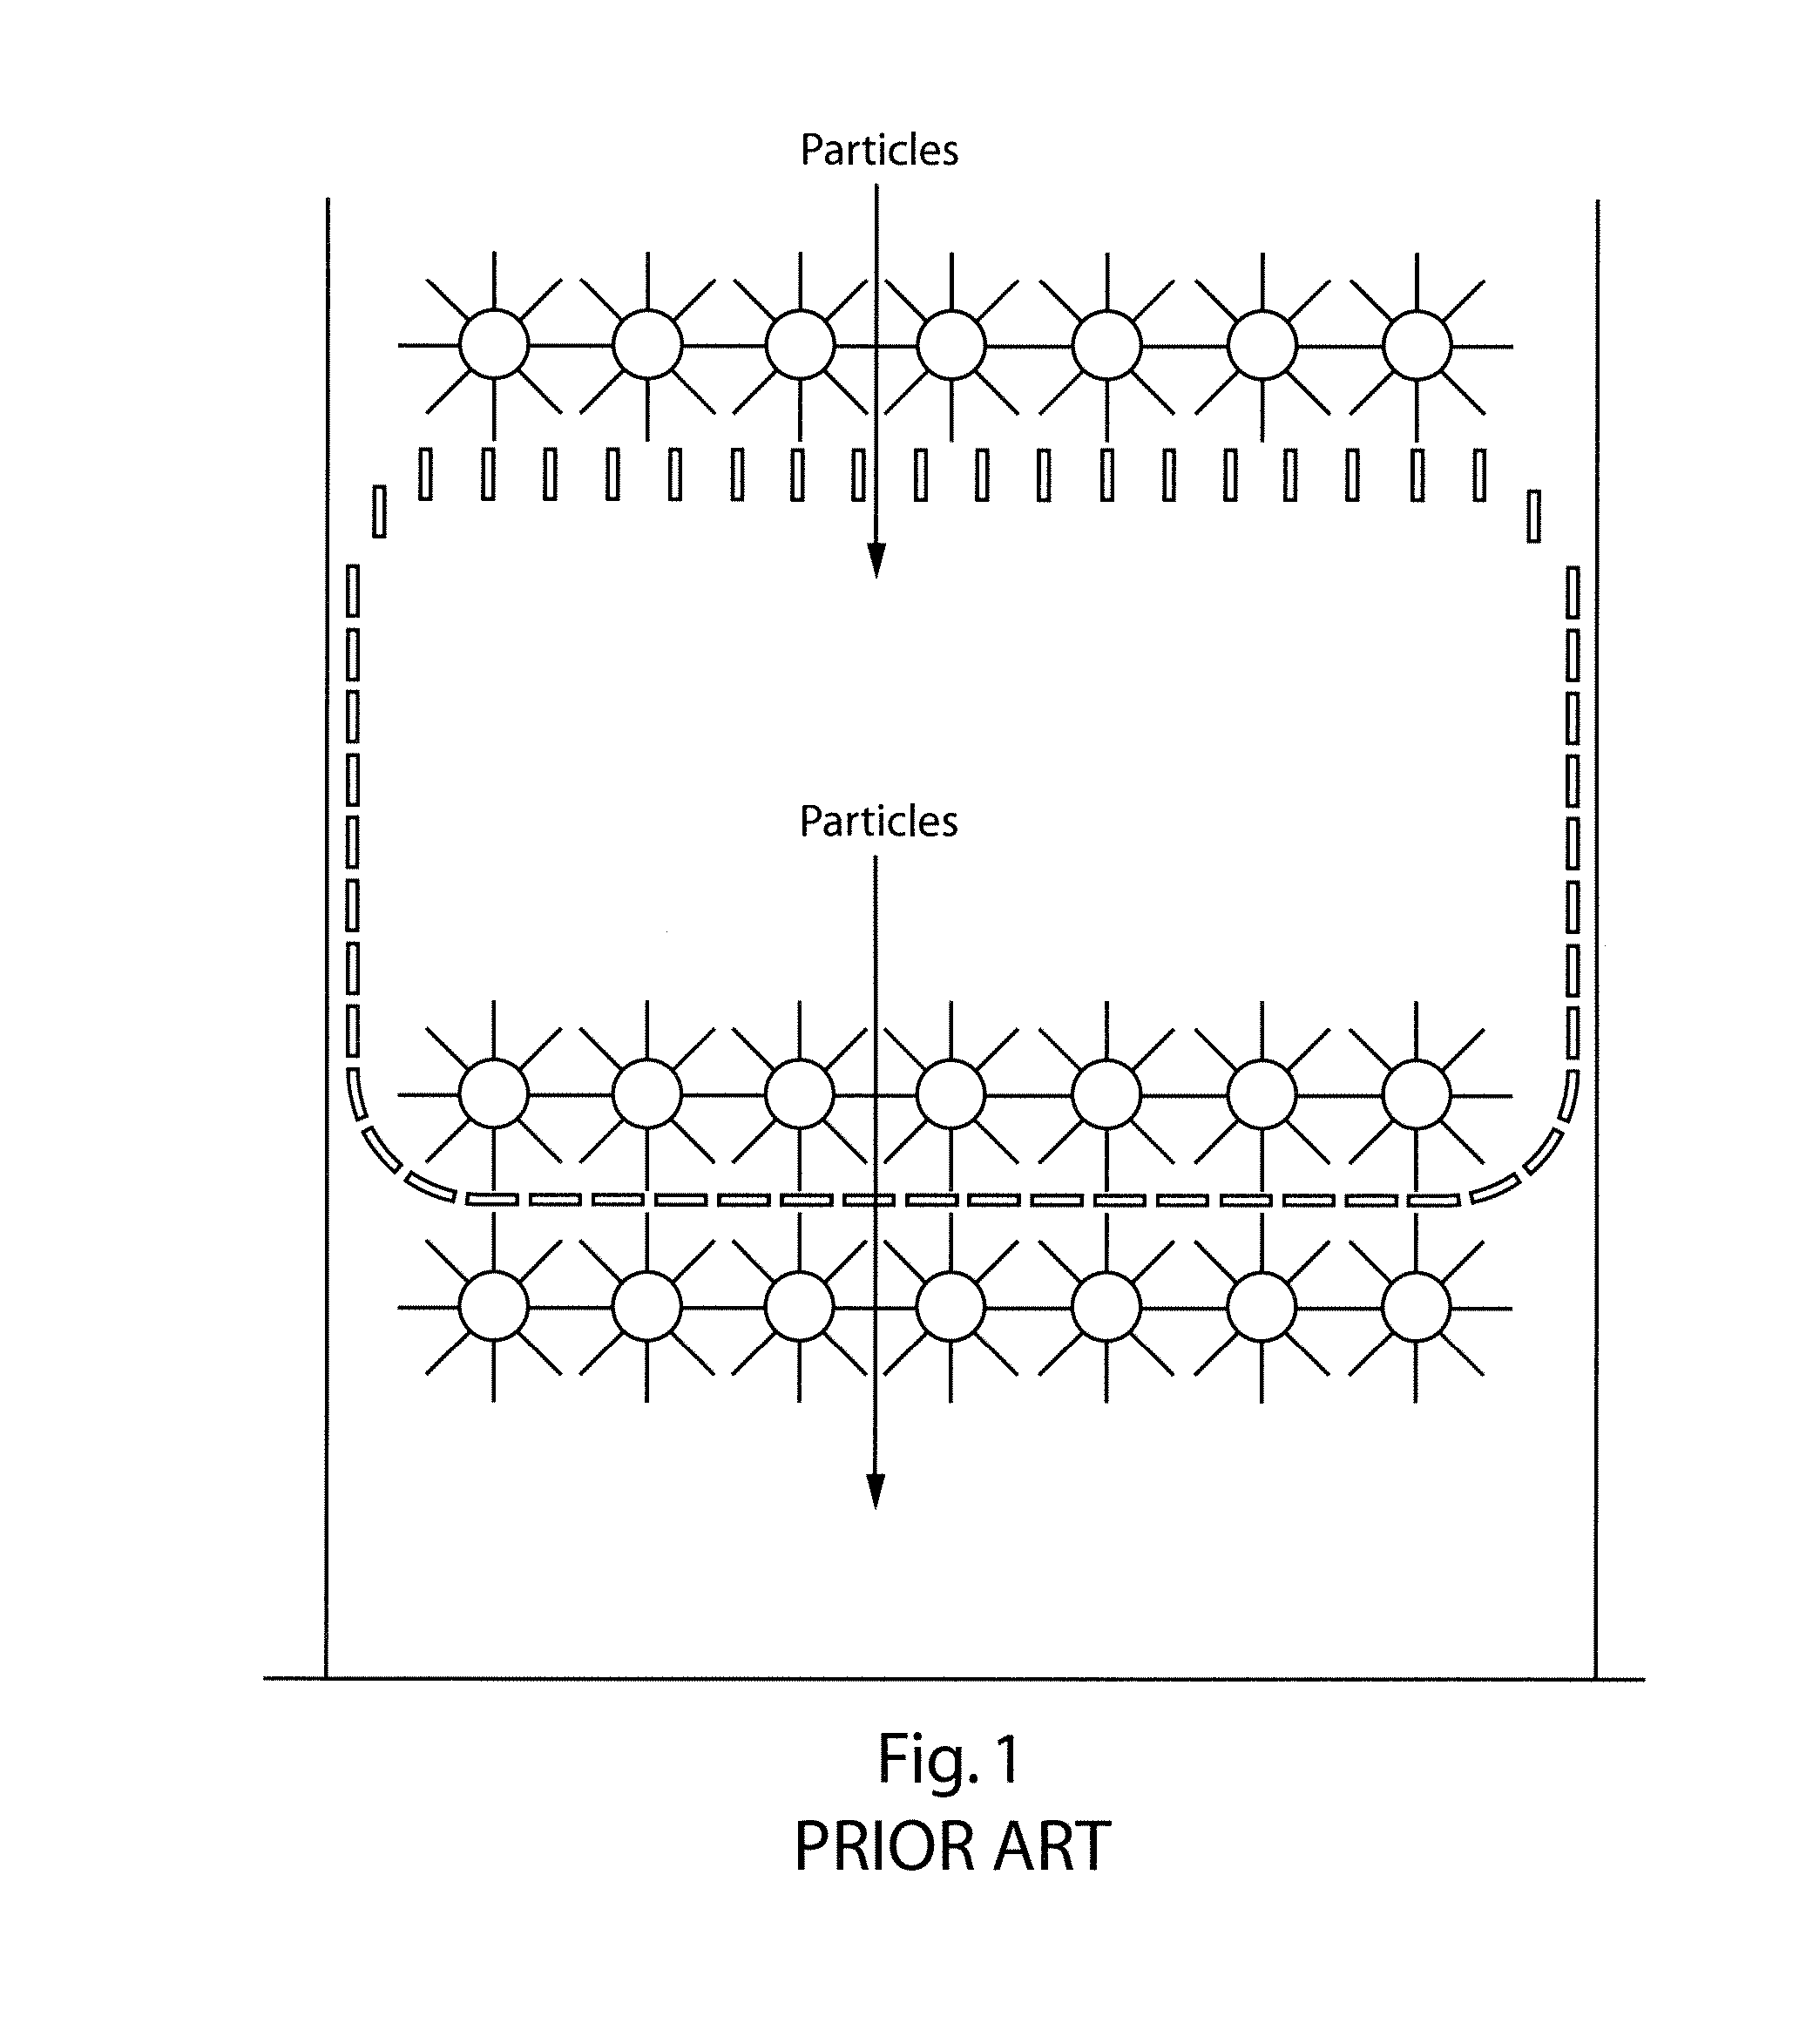 Apparatus for separating particles and methods for using same